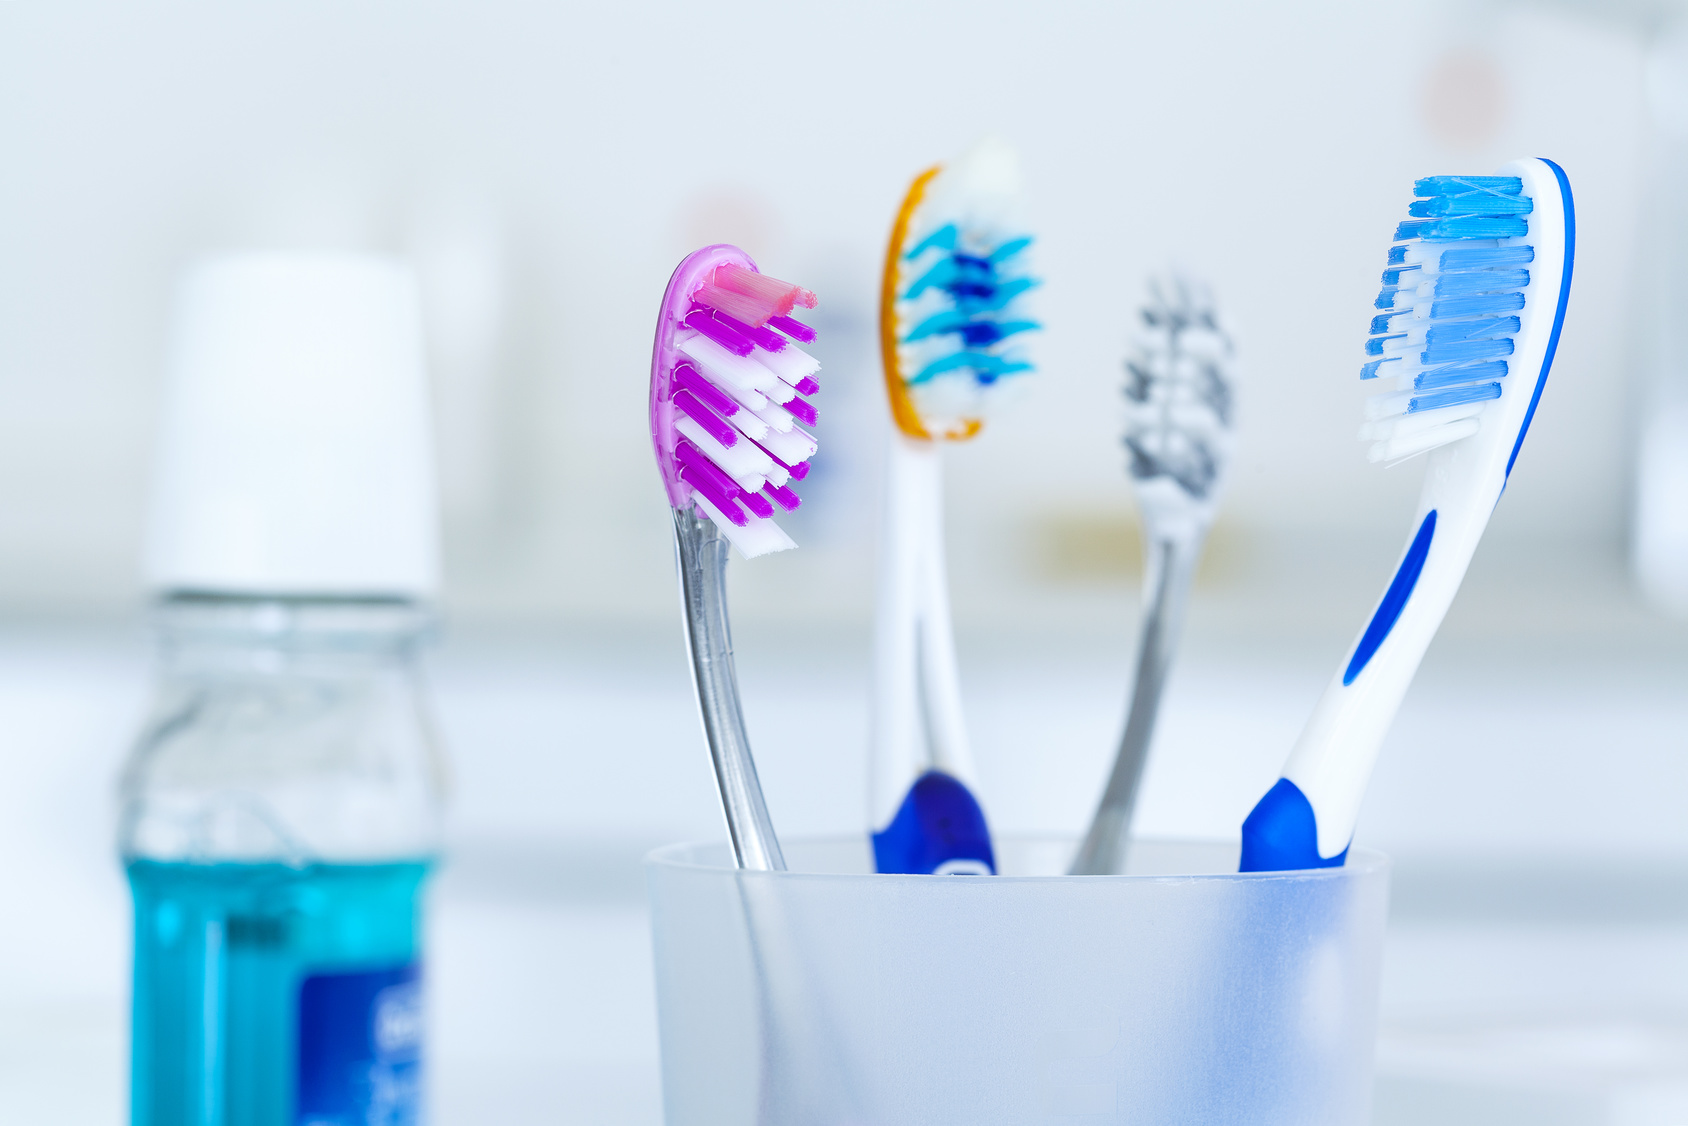 What Are Some Inexpensive Alternatives to Expensive Toothbrushes?